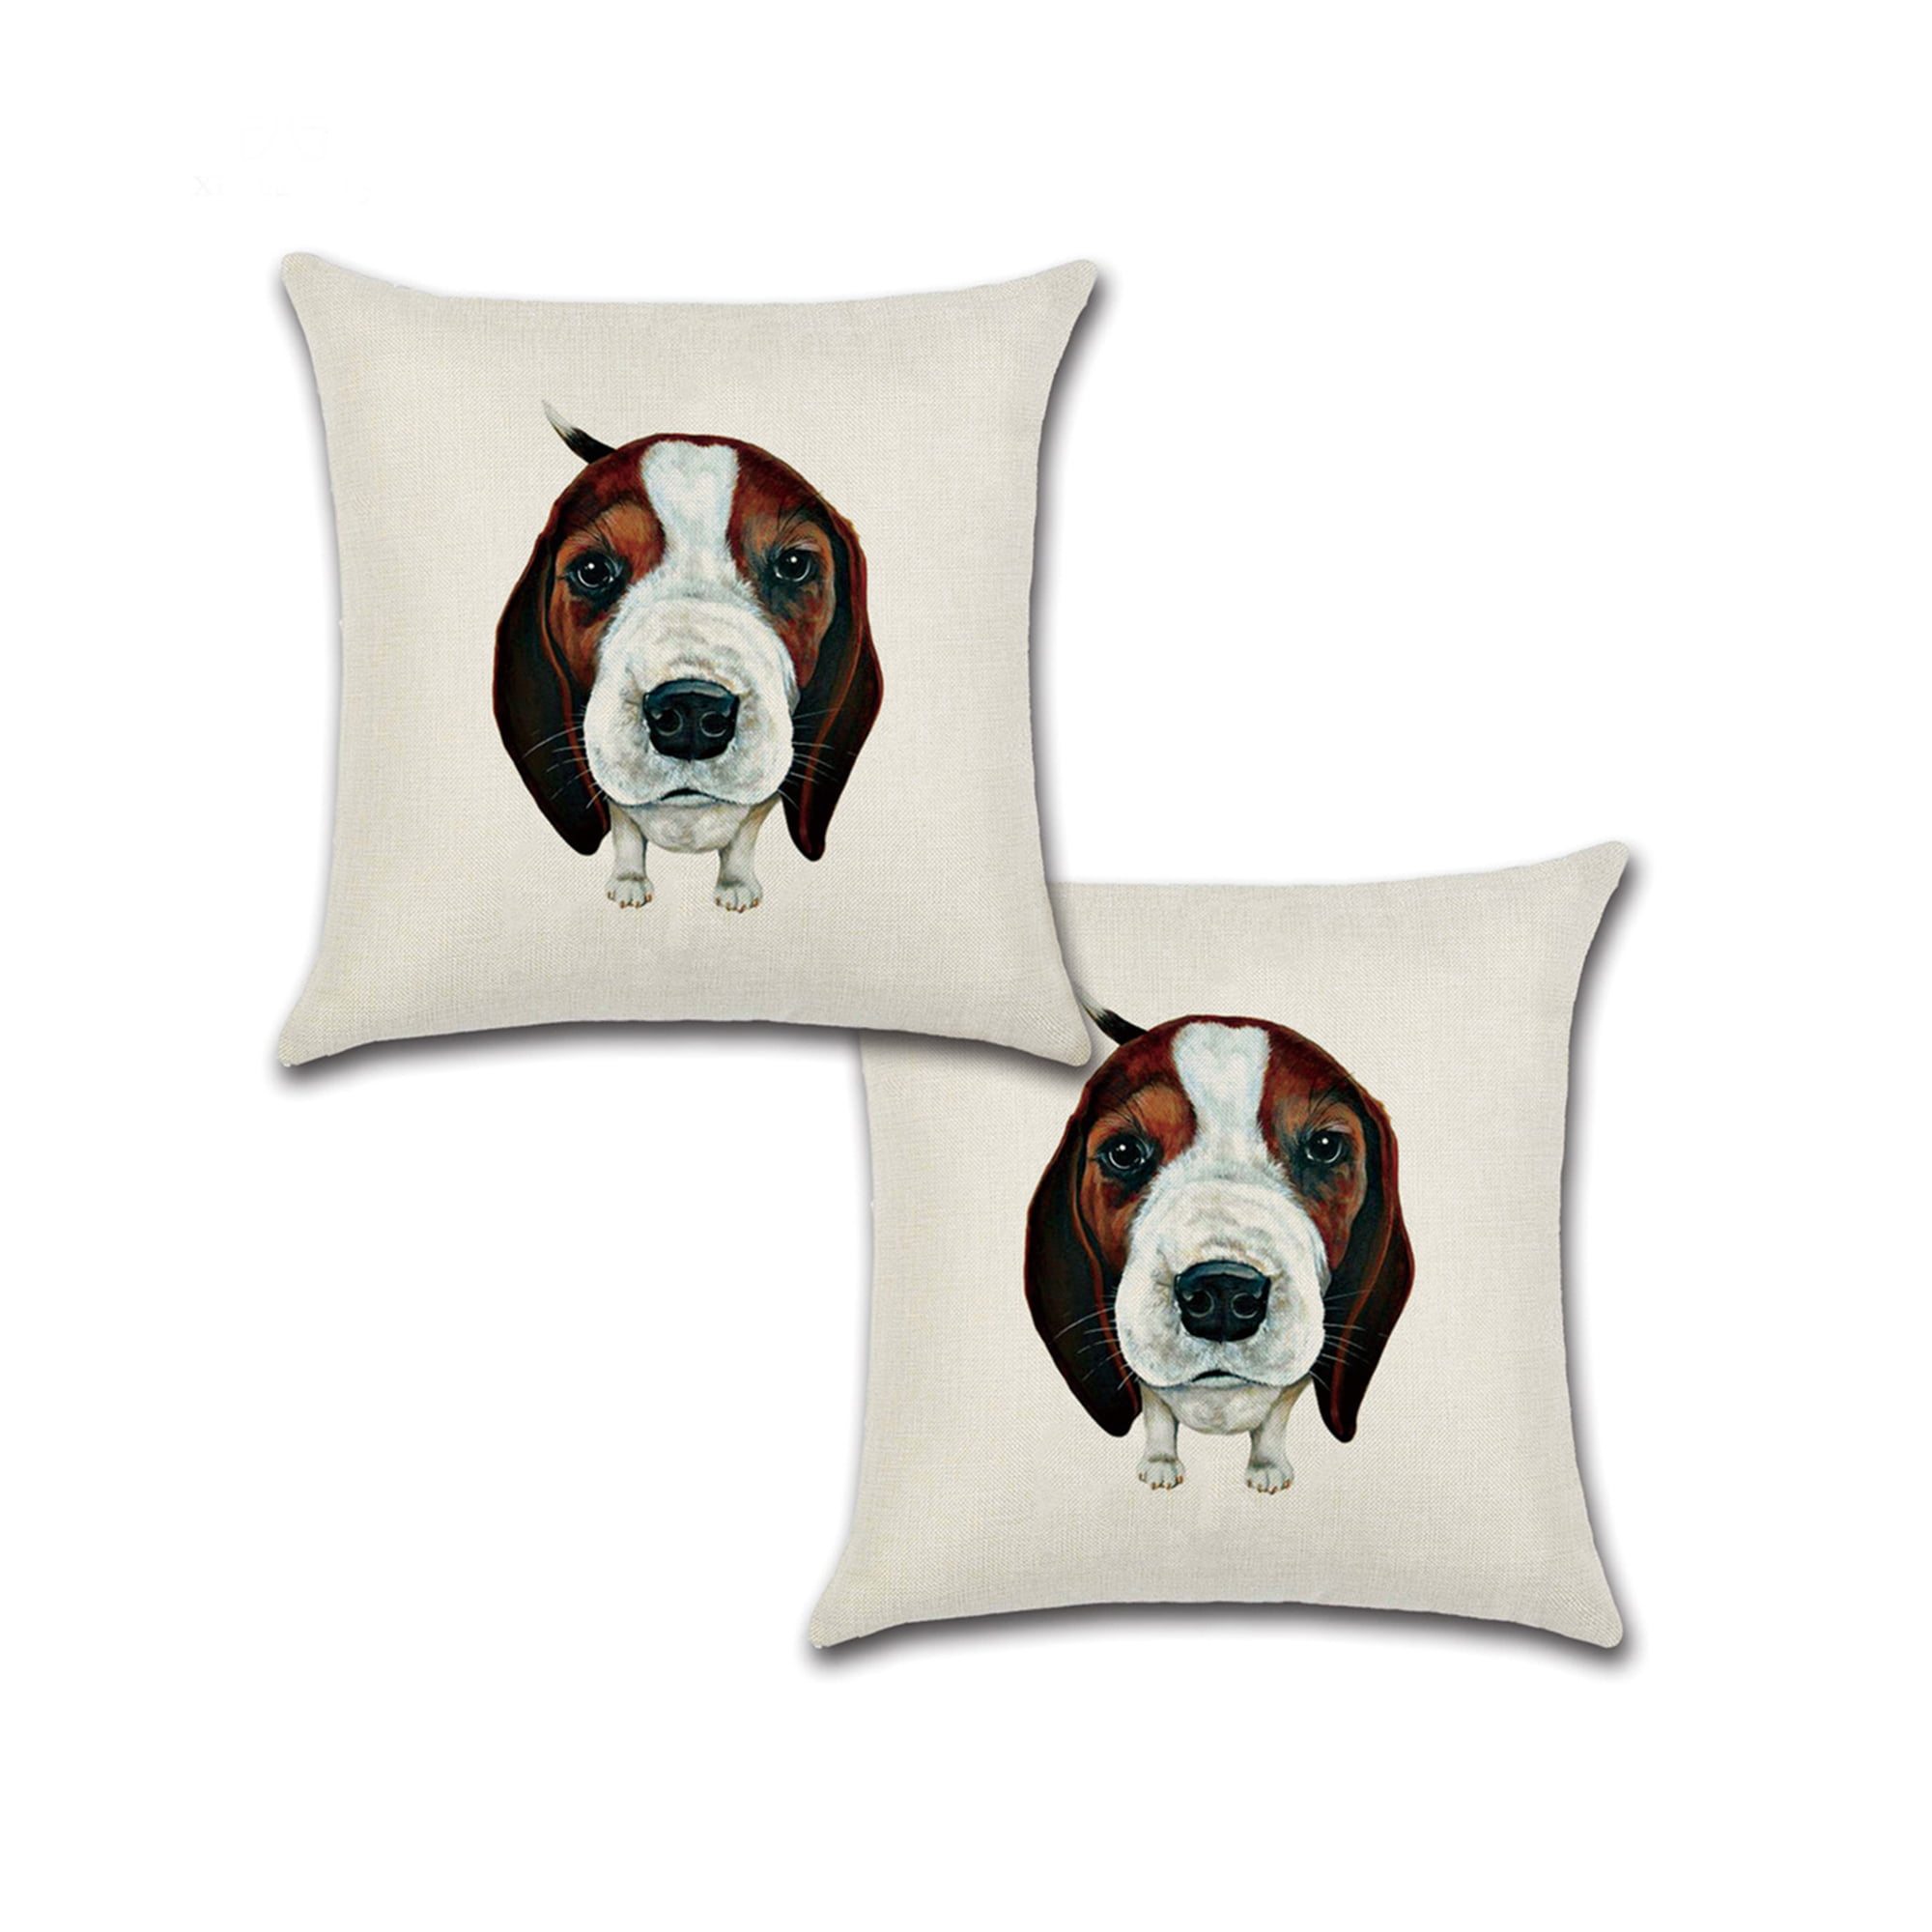 LiLiPi Beagle Graphic Style Decorative Accent Throw Pillow